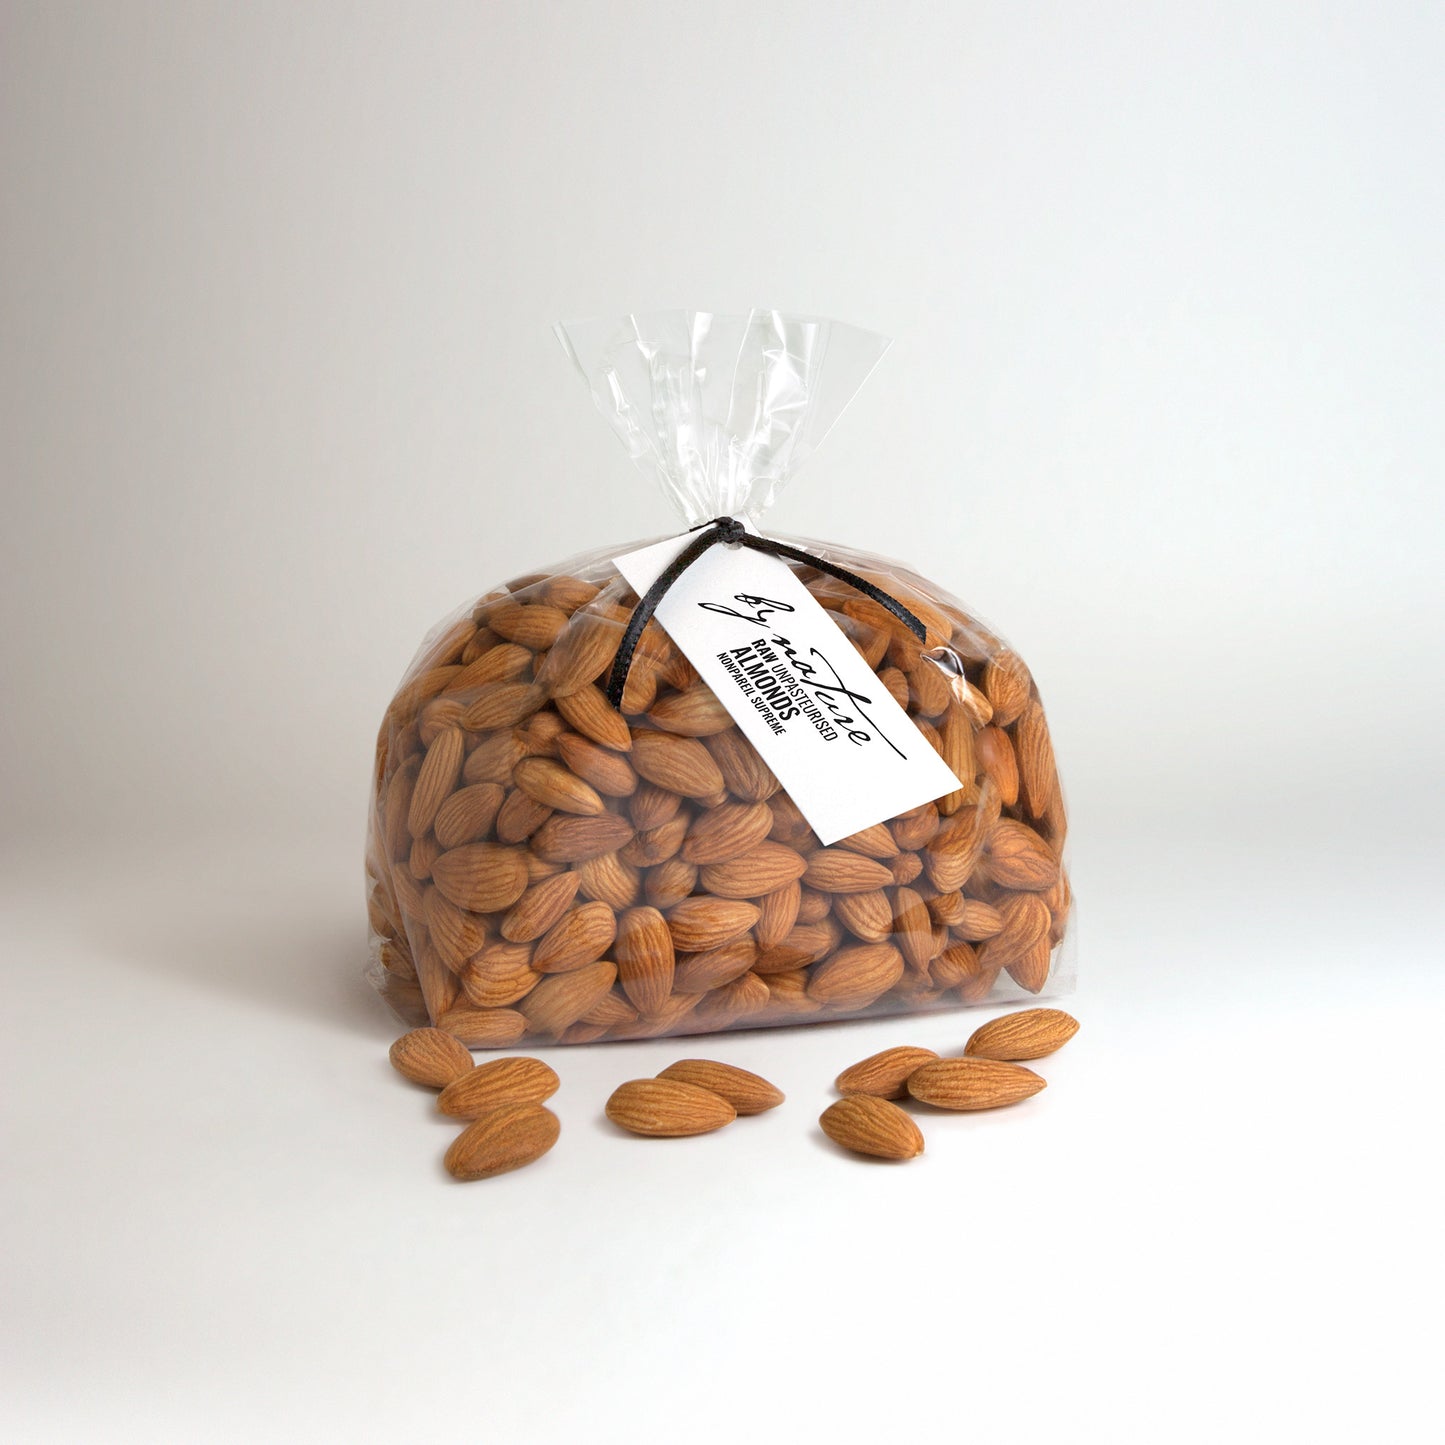 BY NATURE Almonds, 500g - Nonpareil Supreme variety, raw, unpasteurised.